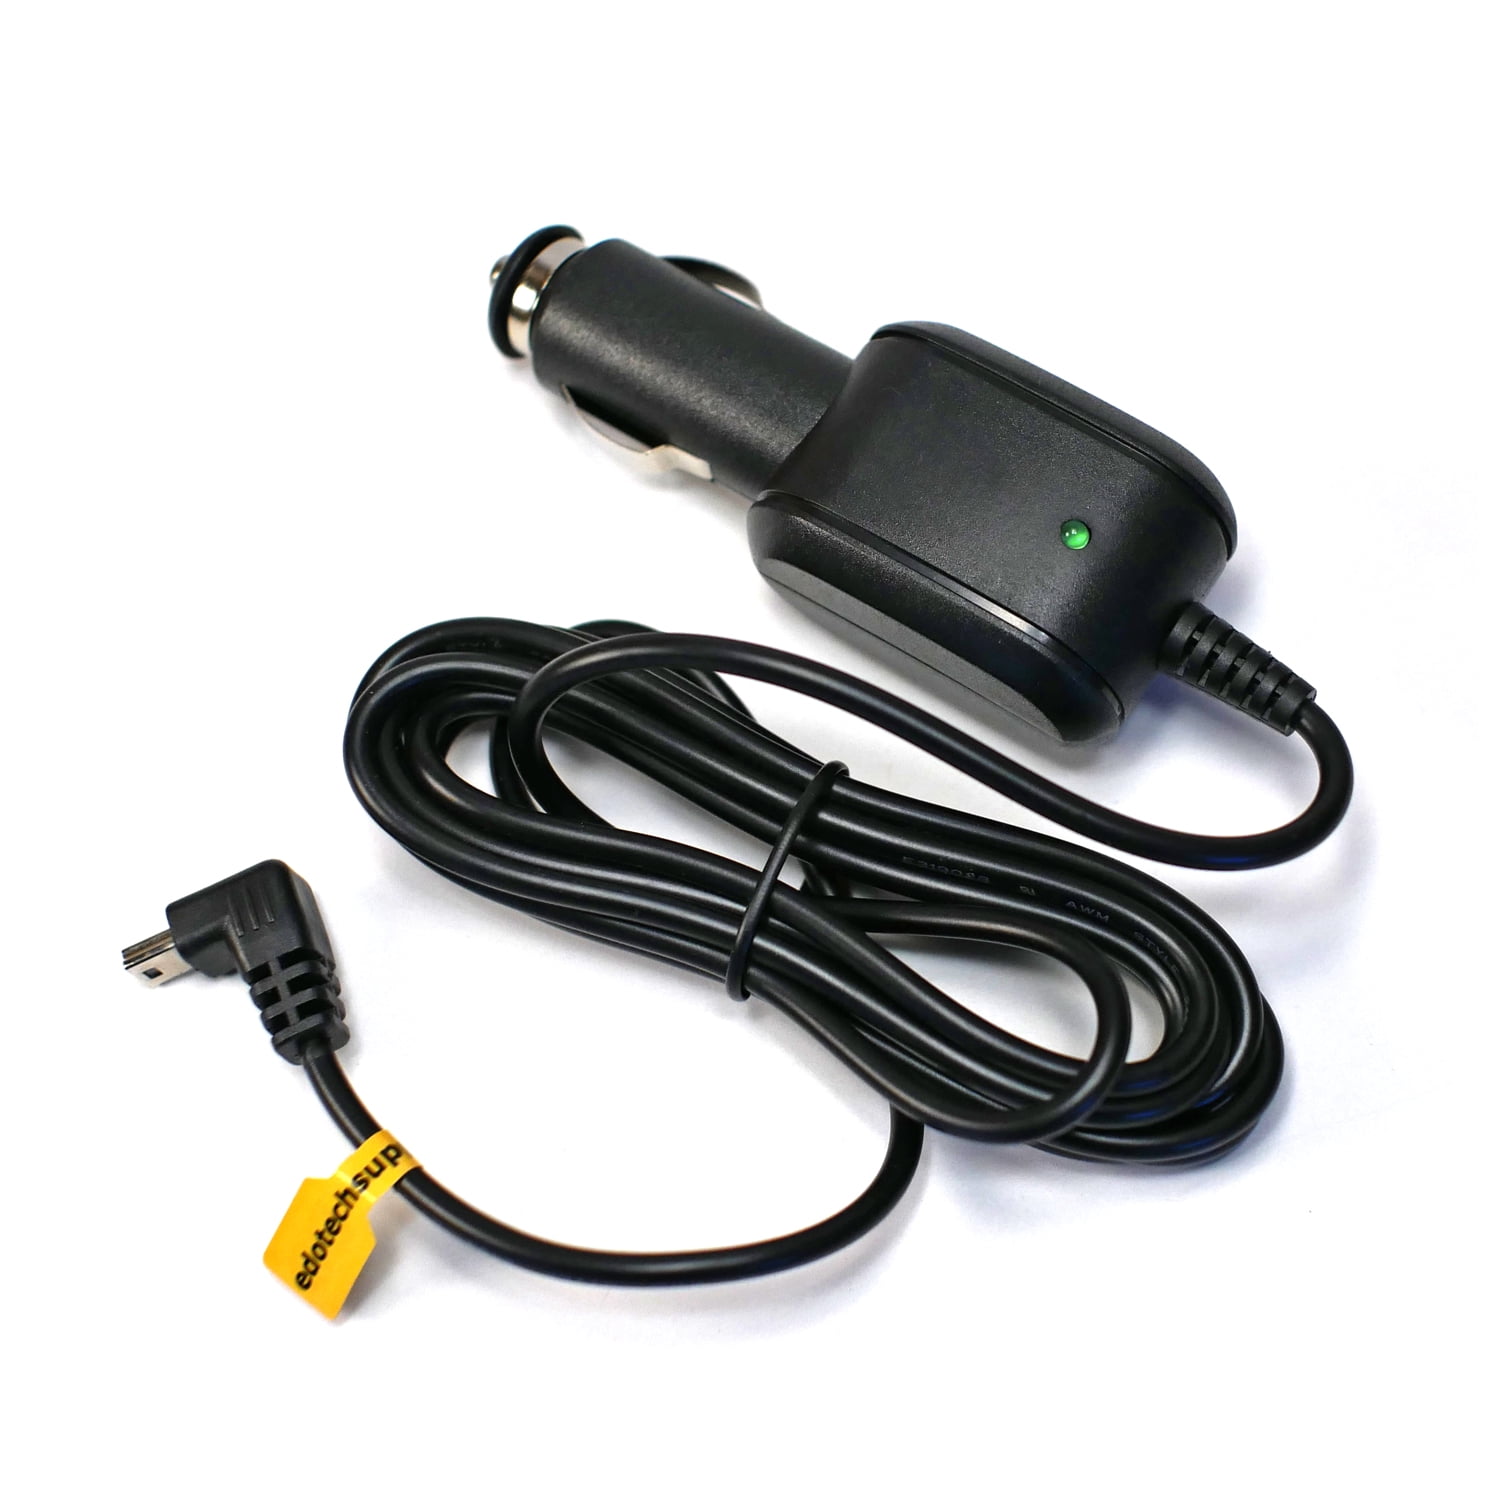 Car Charger Adapter Power Cord Cable For GARMIN nuvi 40 40LM Auto Navigation GPS 